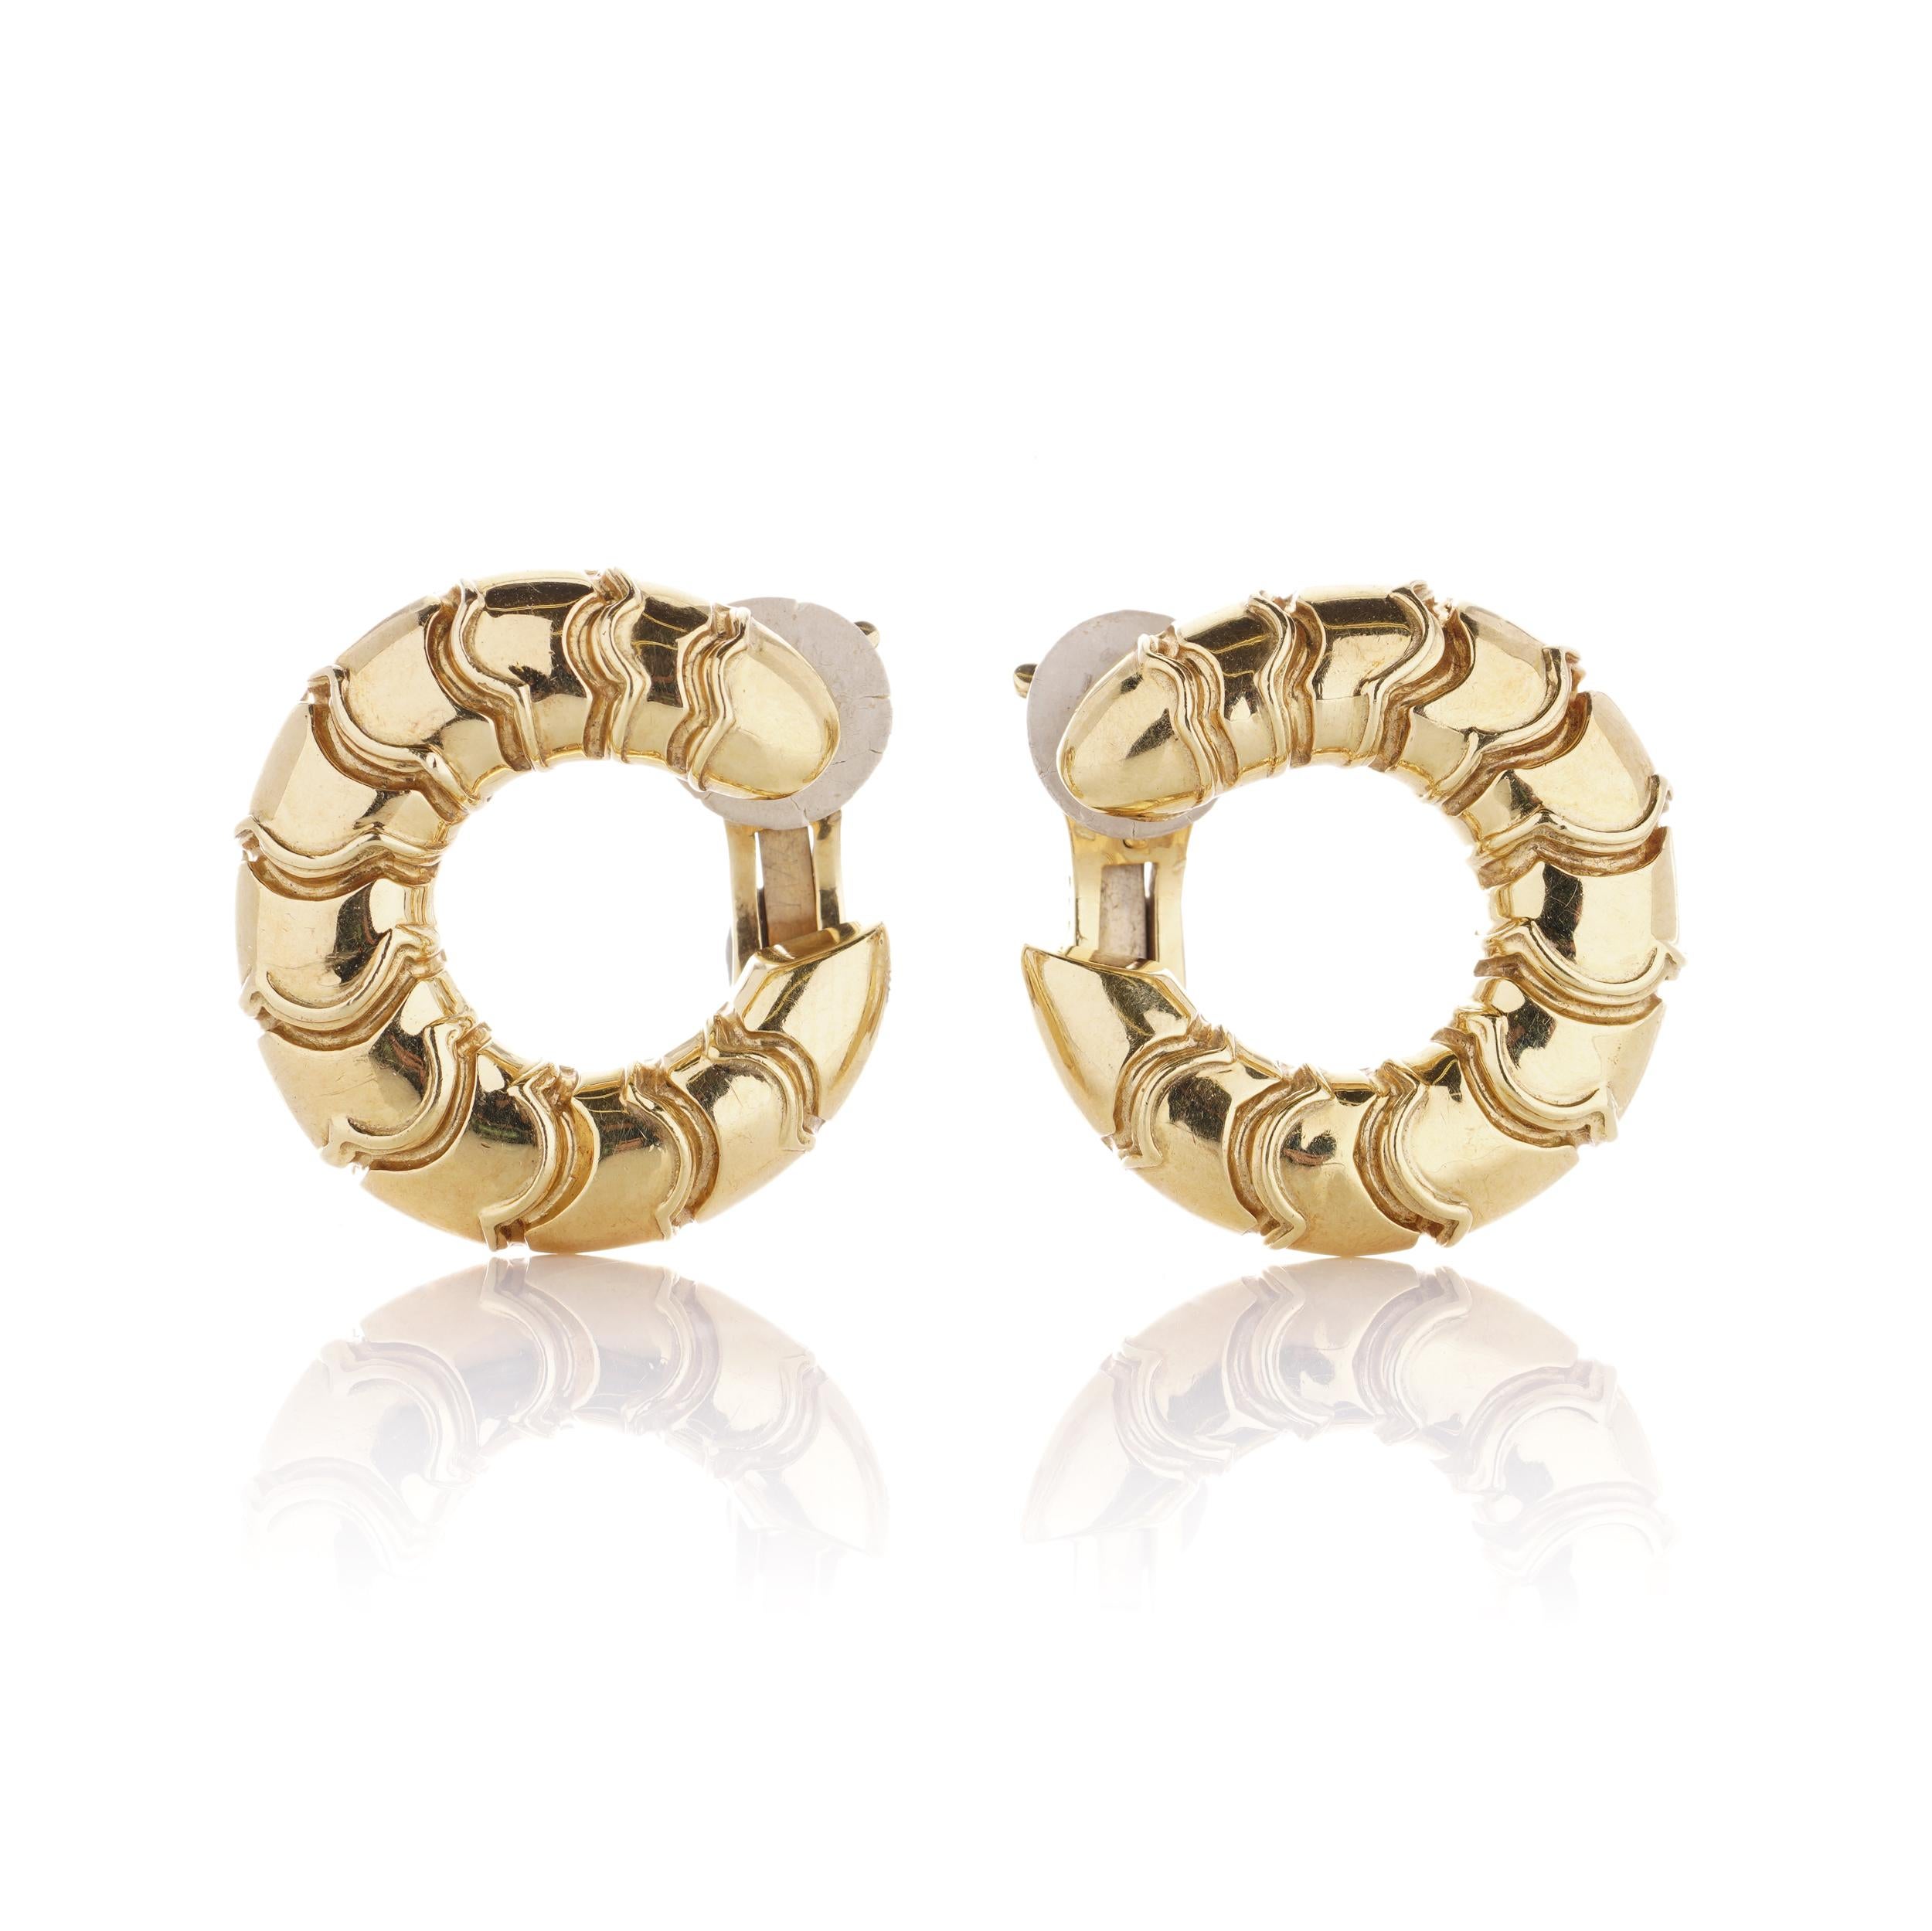 Marina B. Milan 18kt gold vintage pair of hoop ear clips in a scallop design For Sale 3